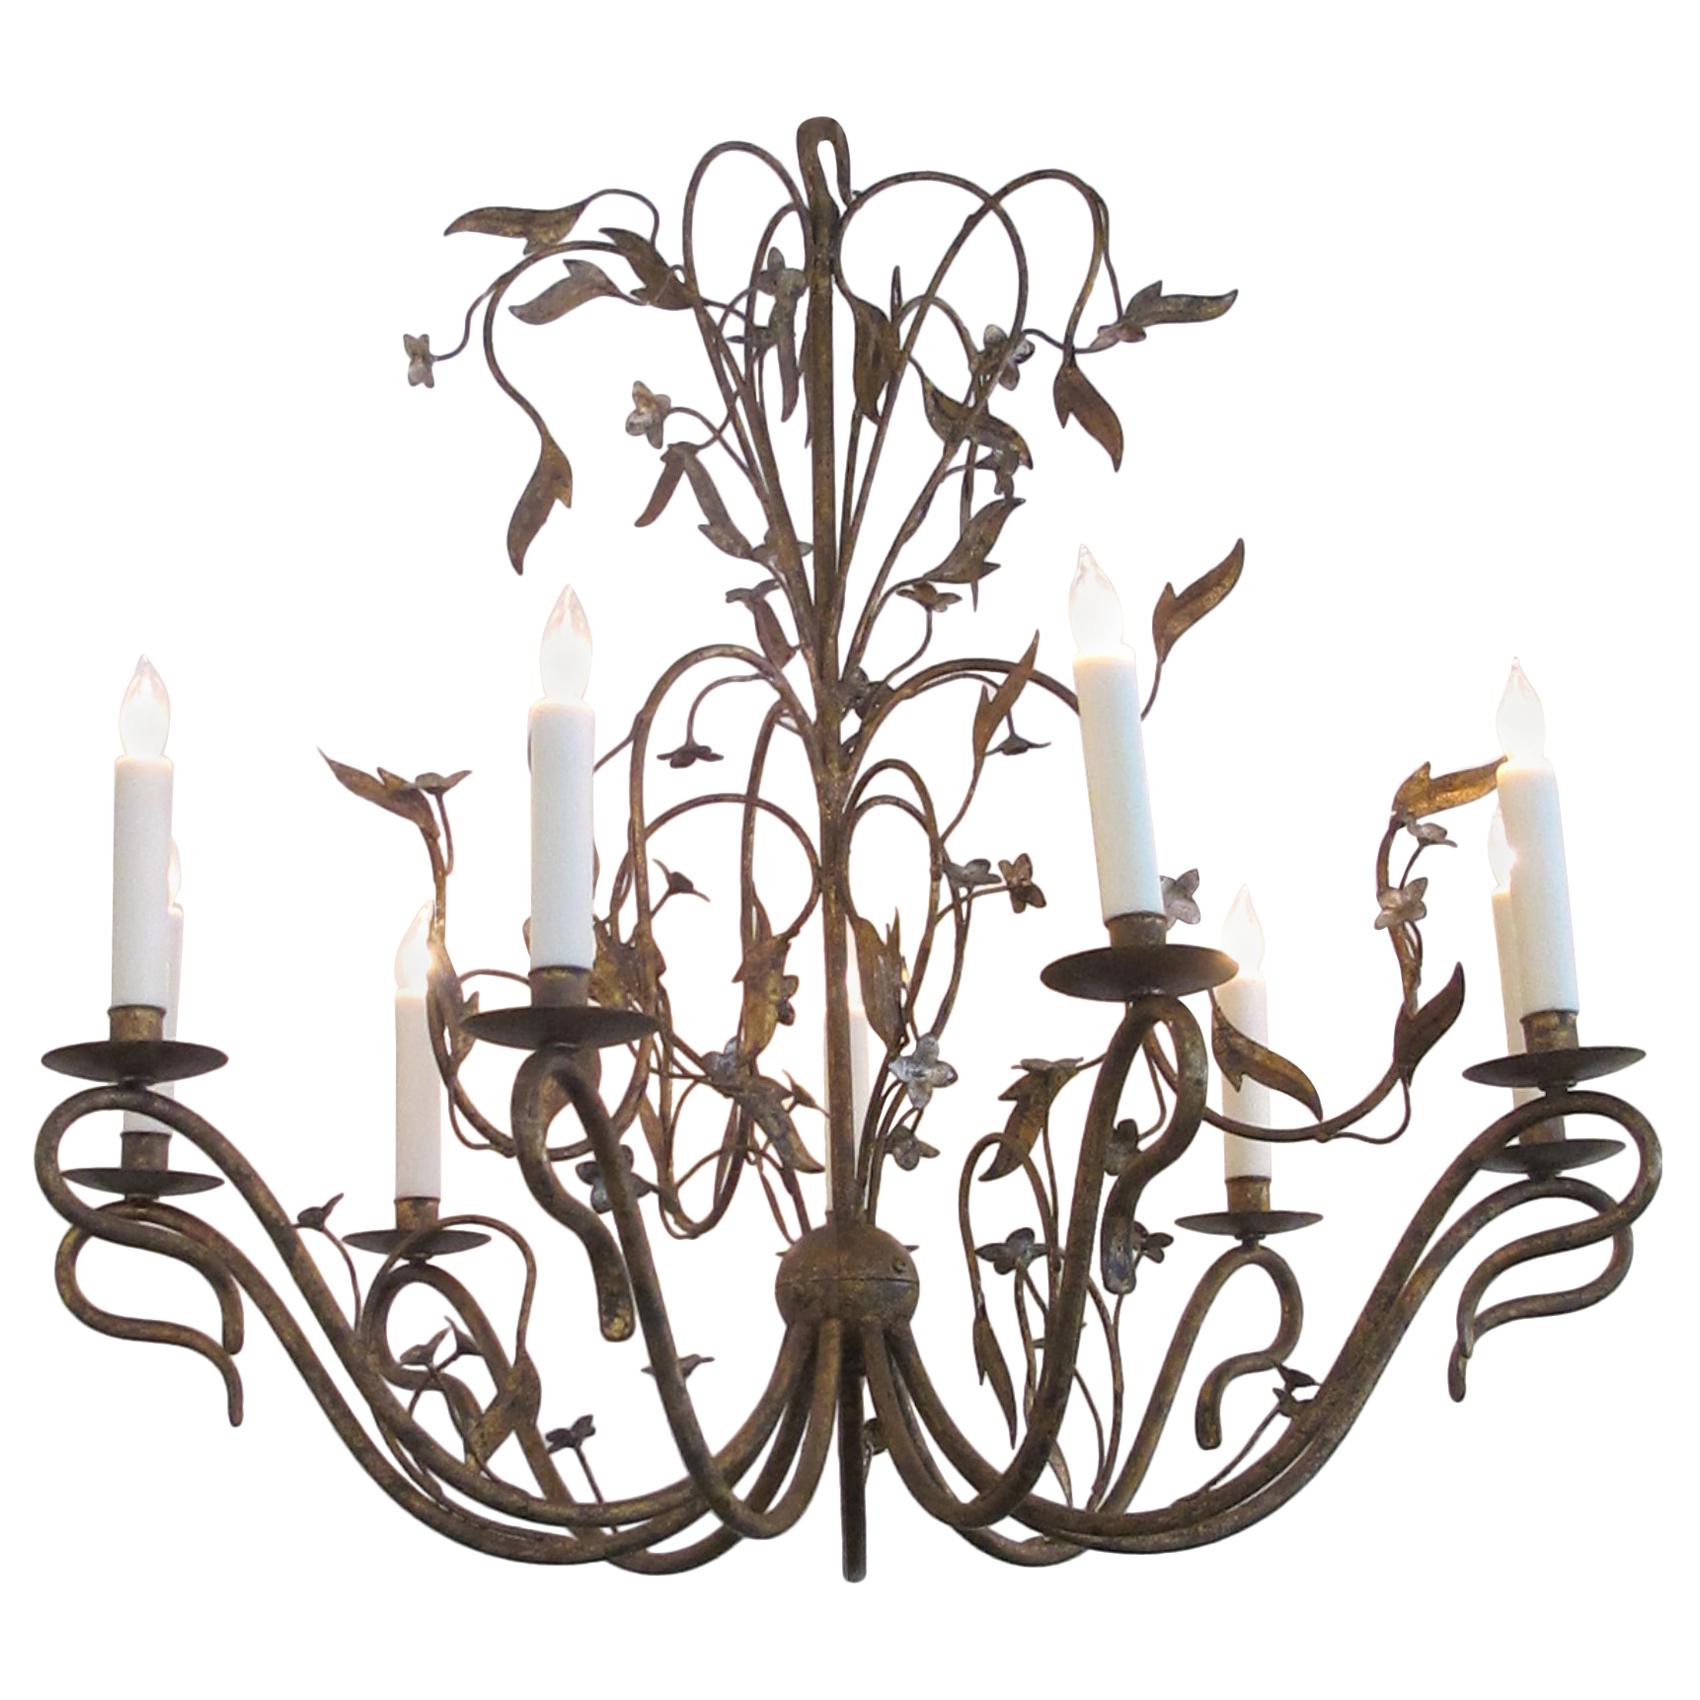 Large-Scale French Gilt-Iron 8-Light Chandelier with Foliate Vines